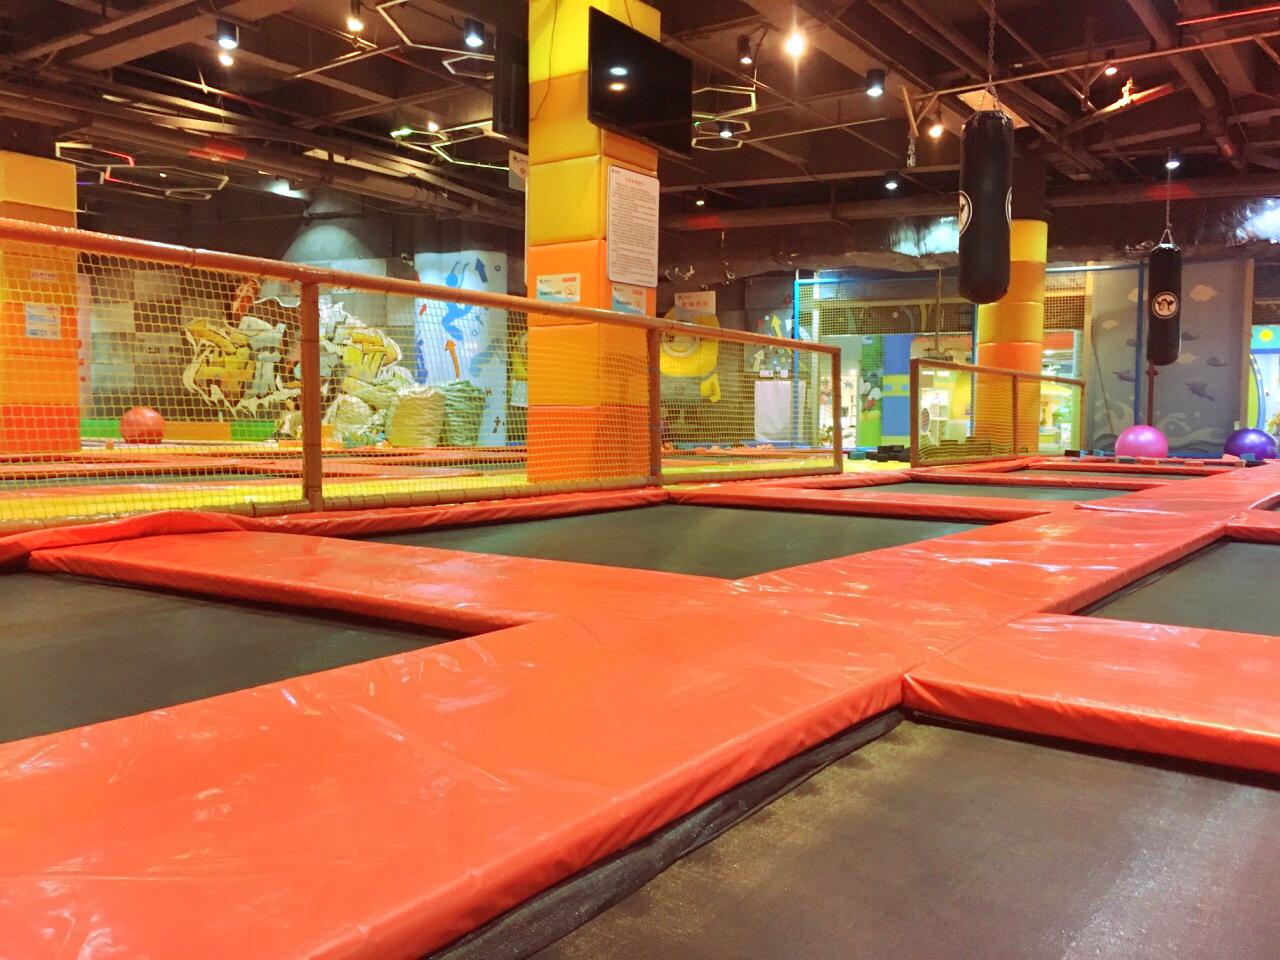 Trampoline Sports Trampoline Park attraction reviews - Trampoline Sports  Trampoline Park tickets - Trampoline Sports Trampoline Park discounts -  Trampoline Sports Trampoline Park transportation, address, opening hours -  attractions, hotels, and food